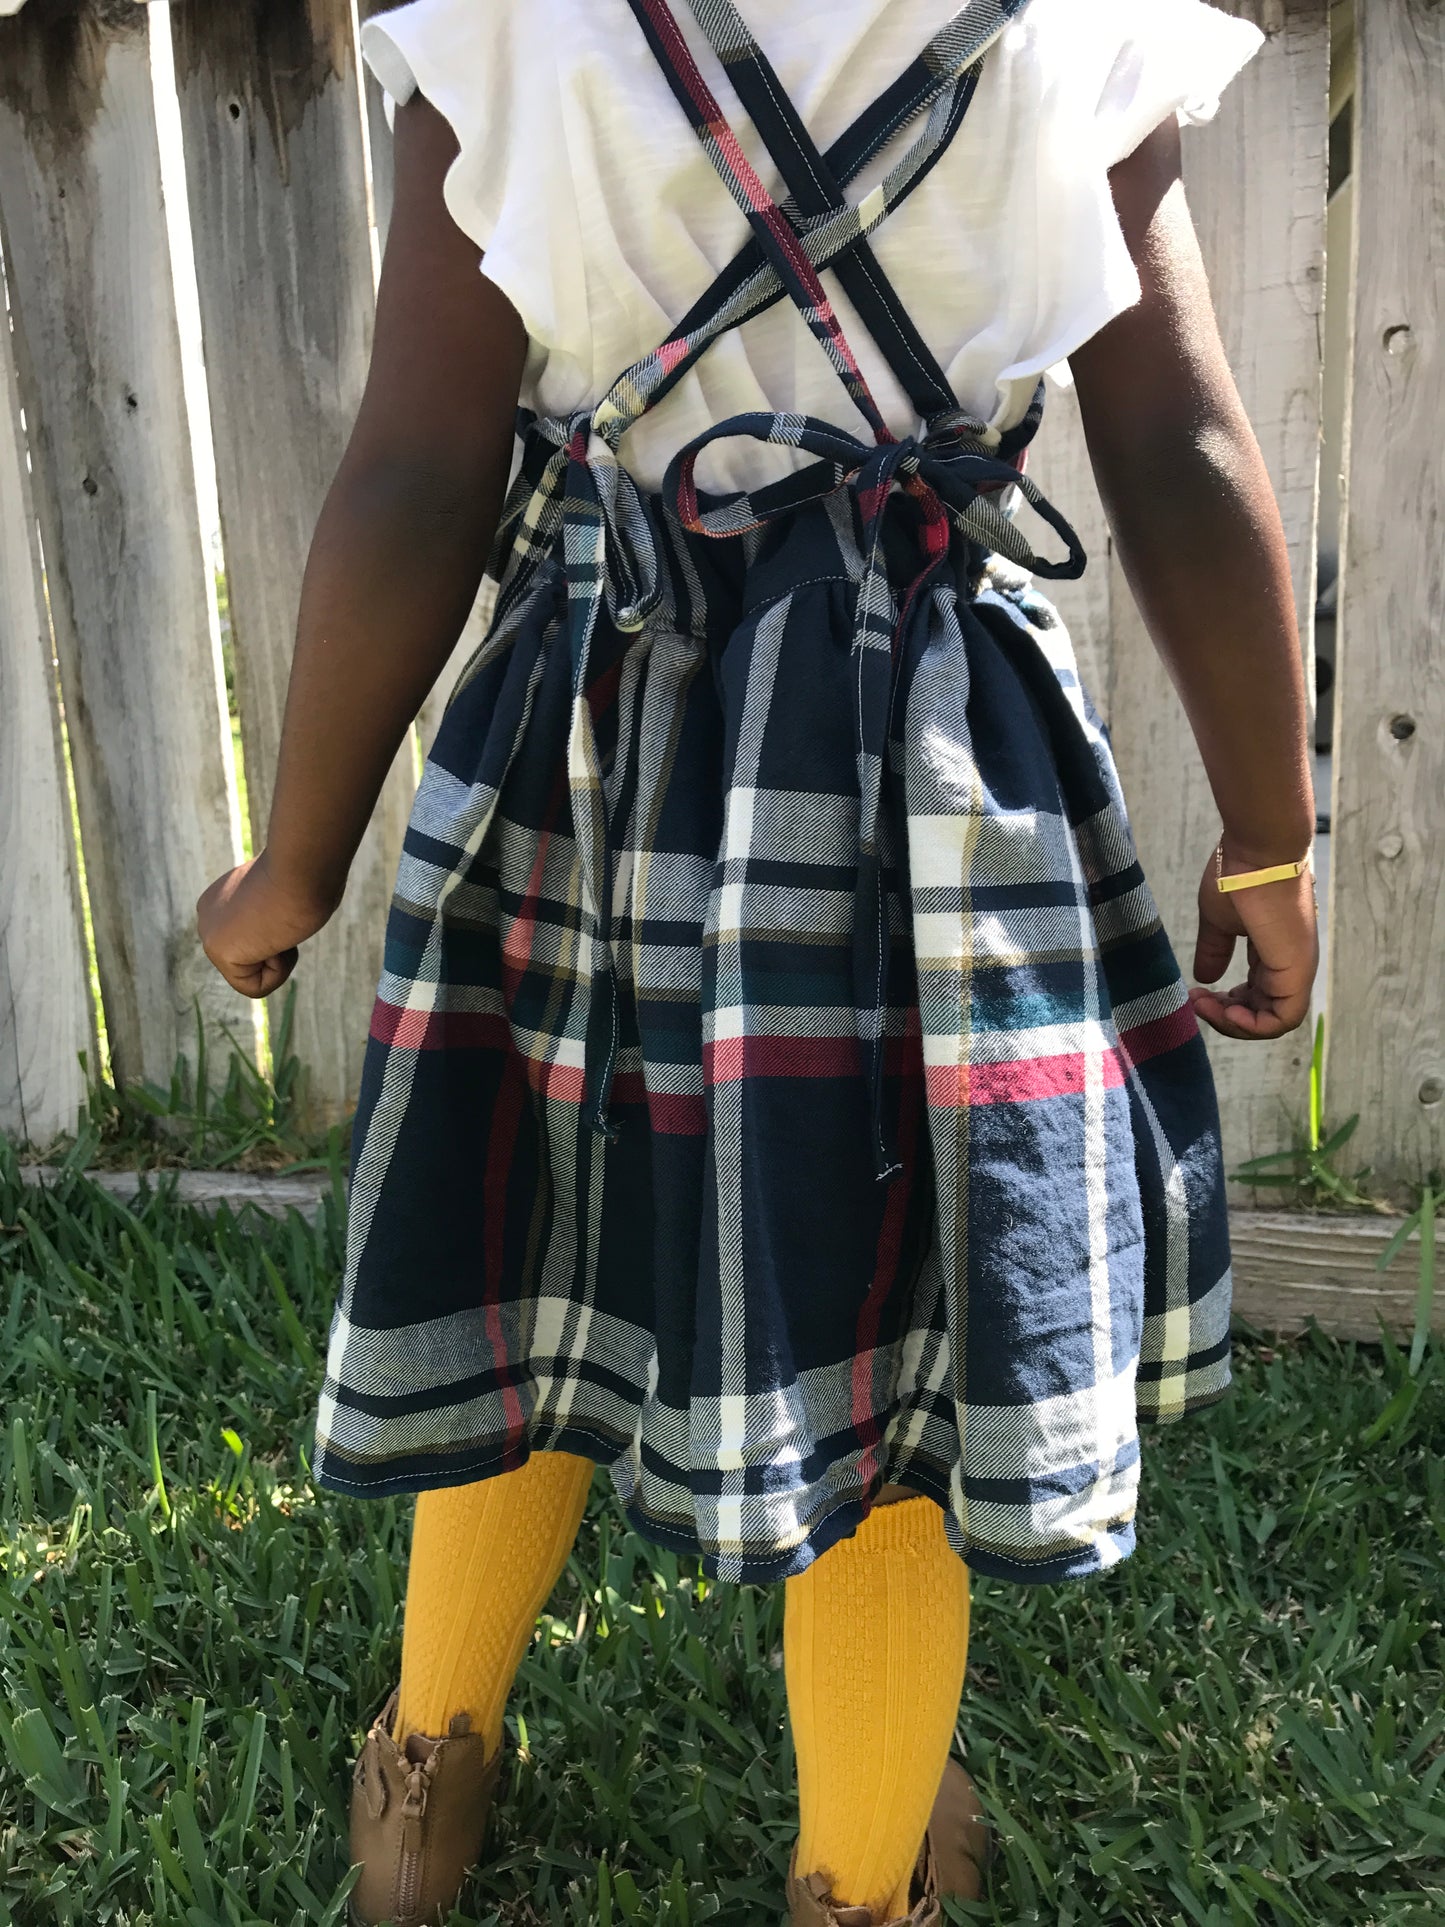 Autumn pinafore Back To School Dress - pinafore - school pinafore - back to school outfit - first day of school dress - school dress